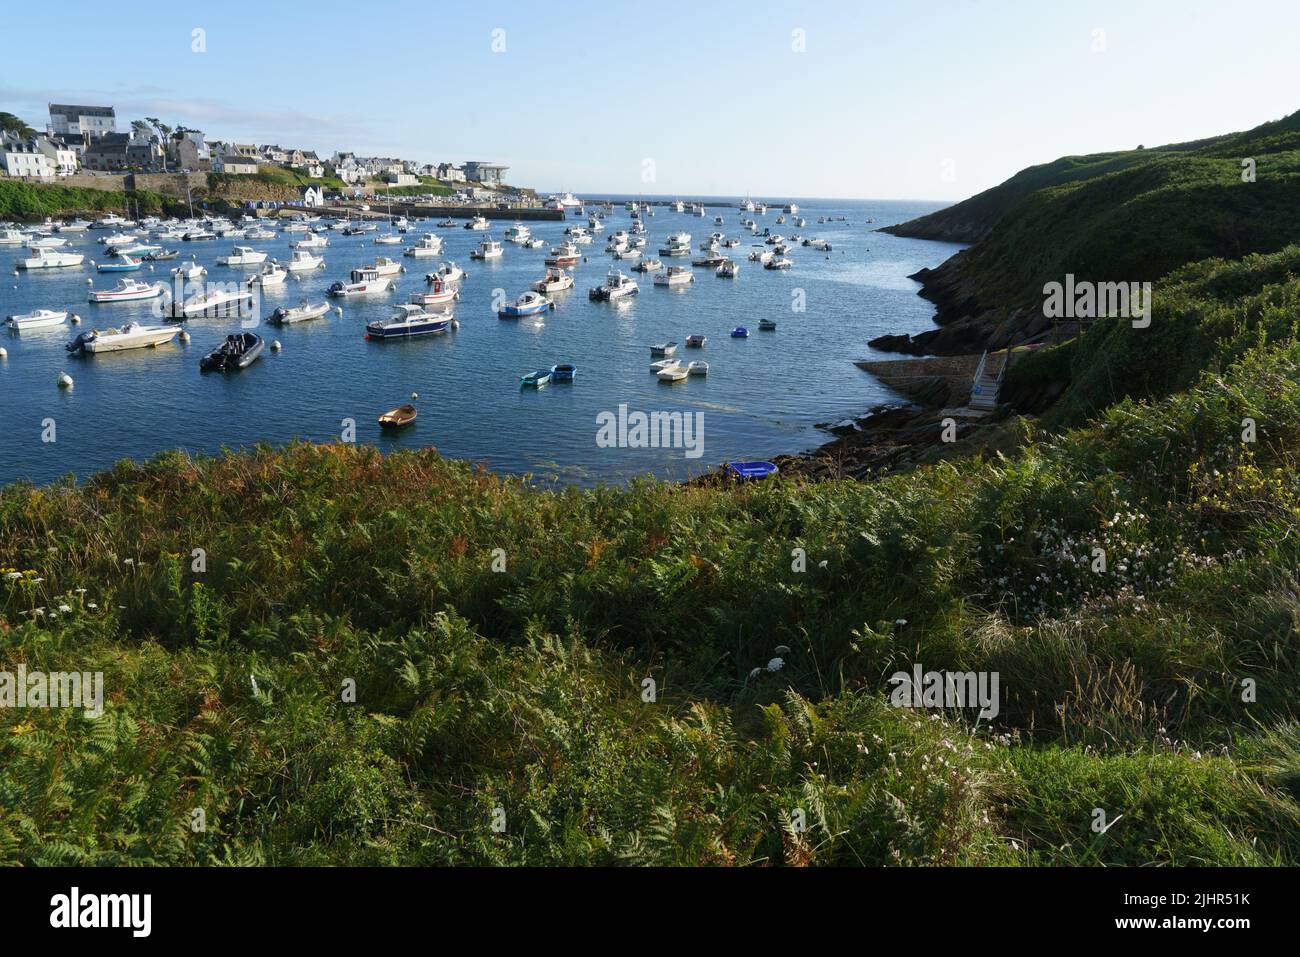 France, Bretagne region (Brittany), North tip of Finistère, pays d'Iroise, Le Conquet, harbour, Stock Photo